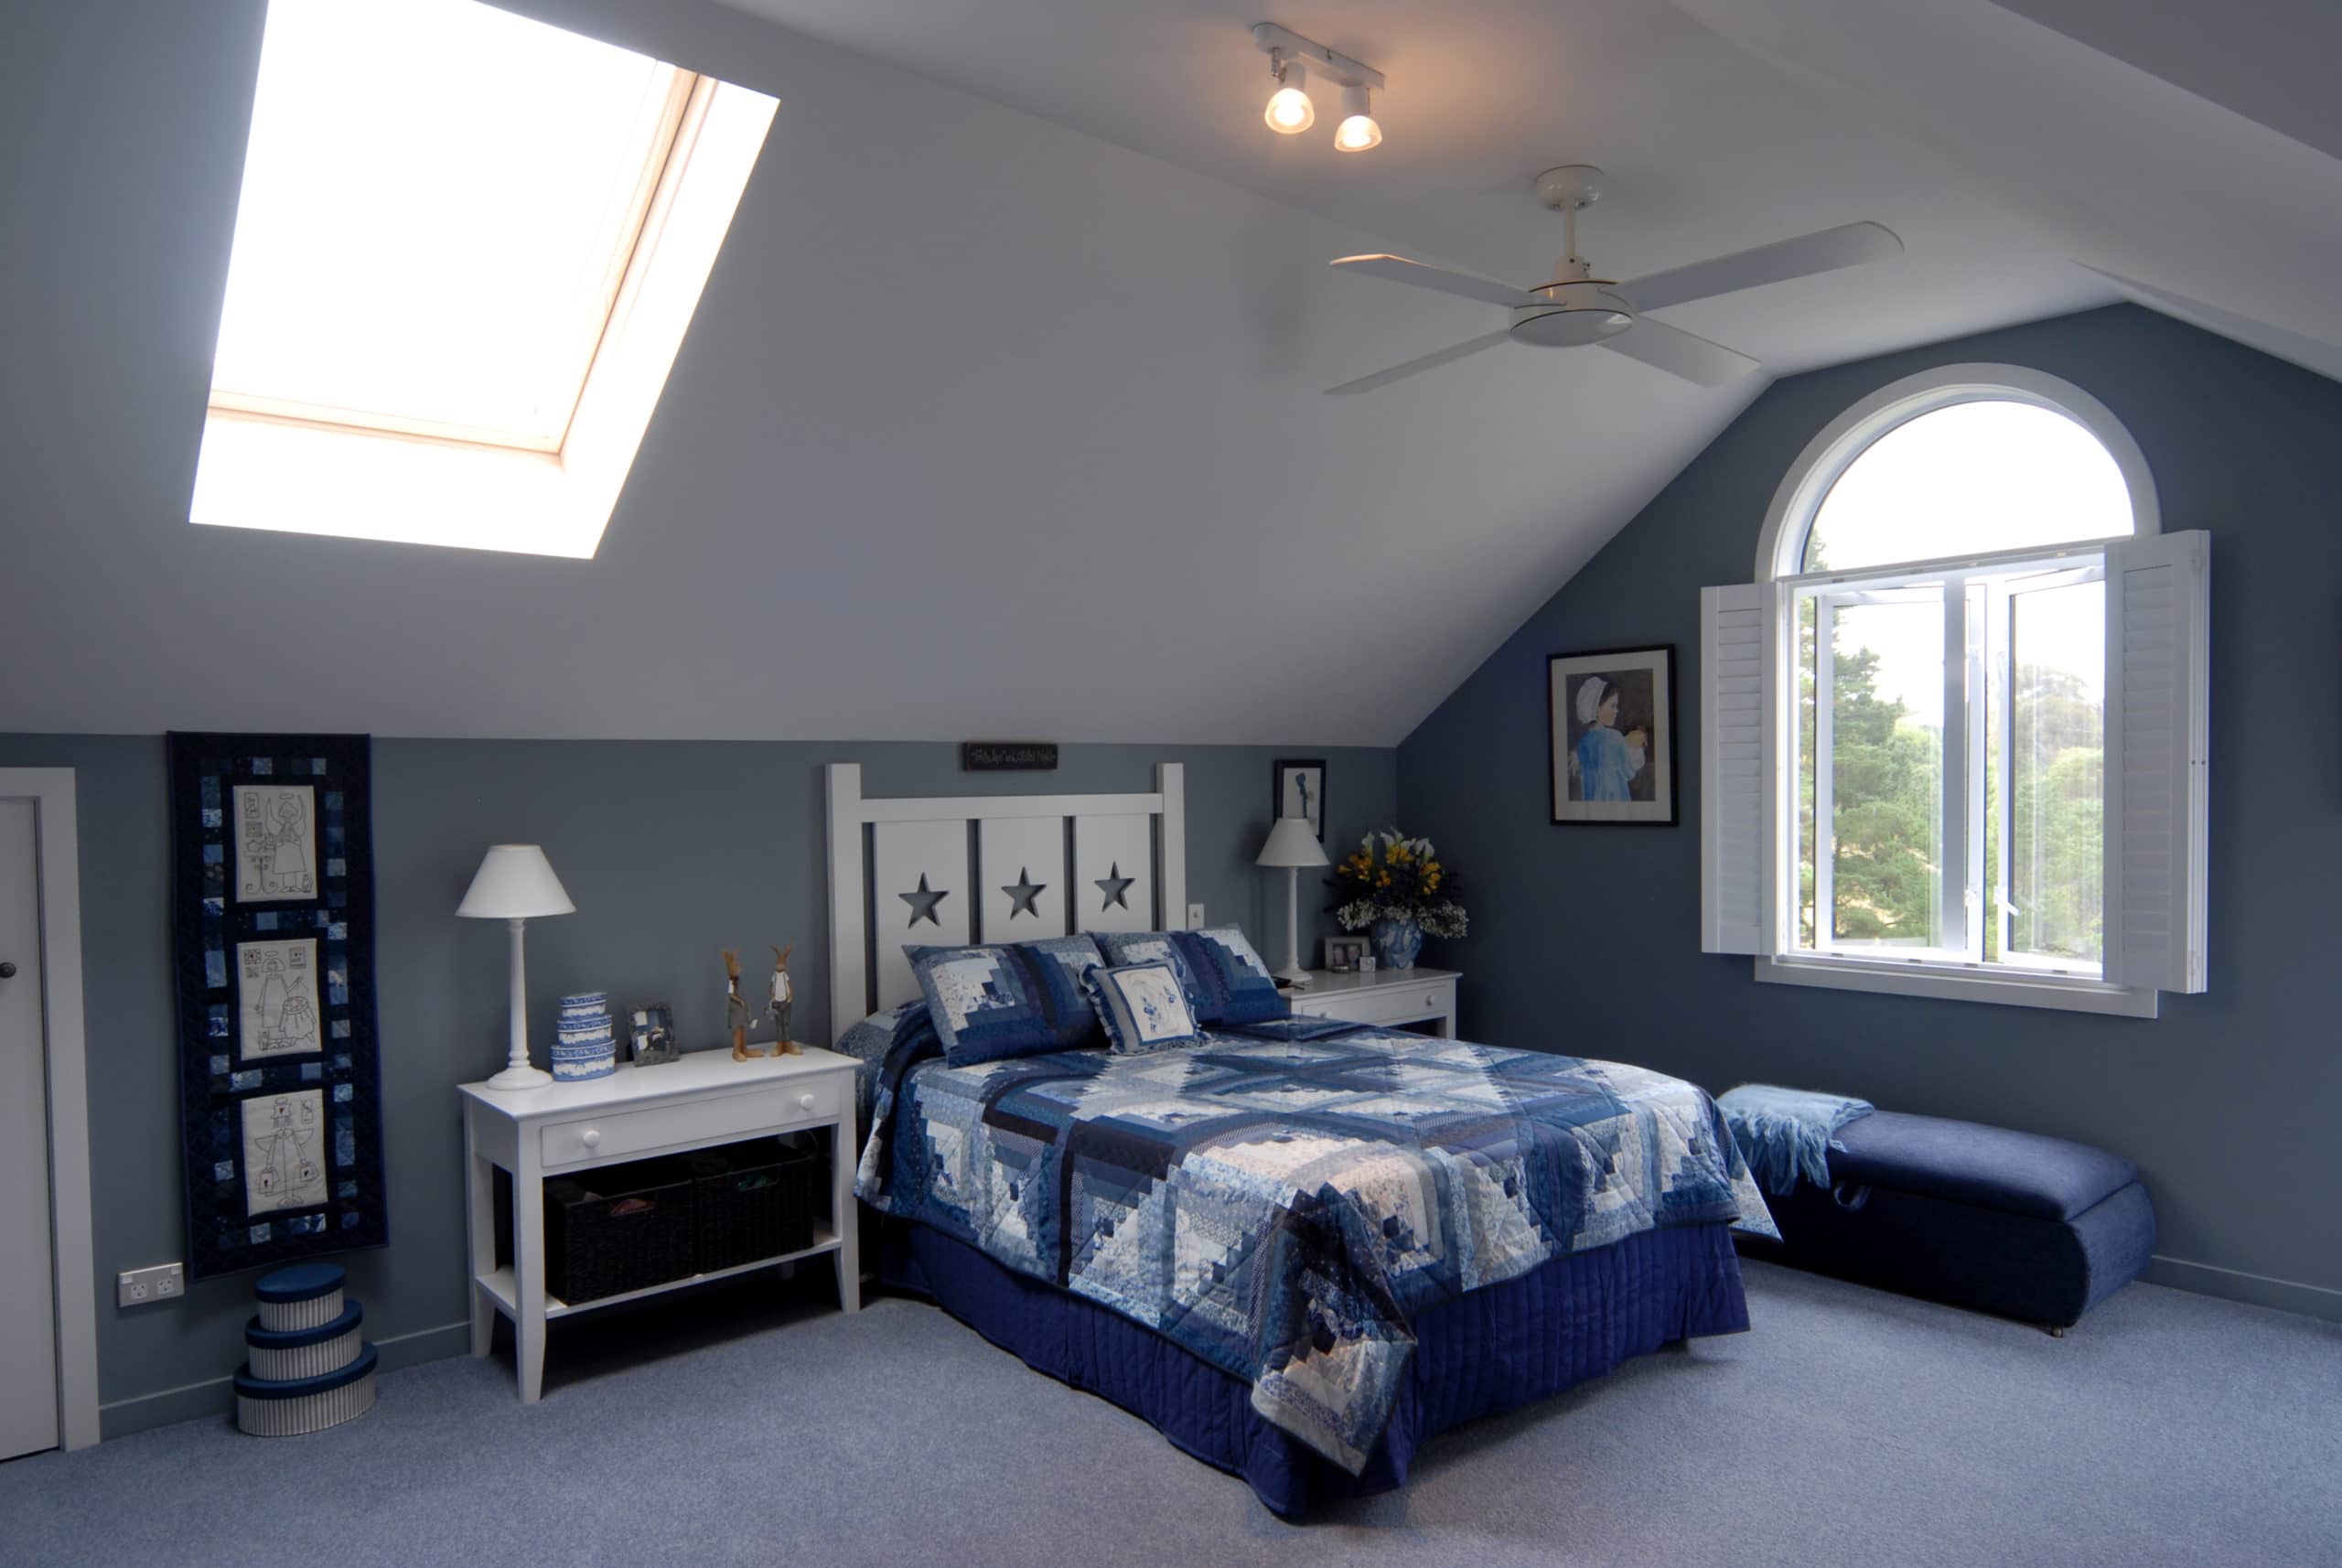 Blue themed bedroom interior with skylight